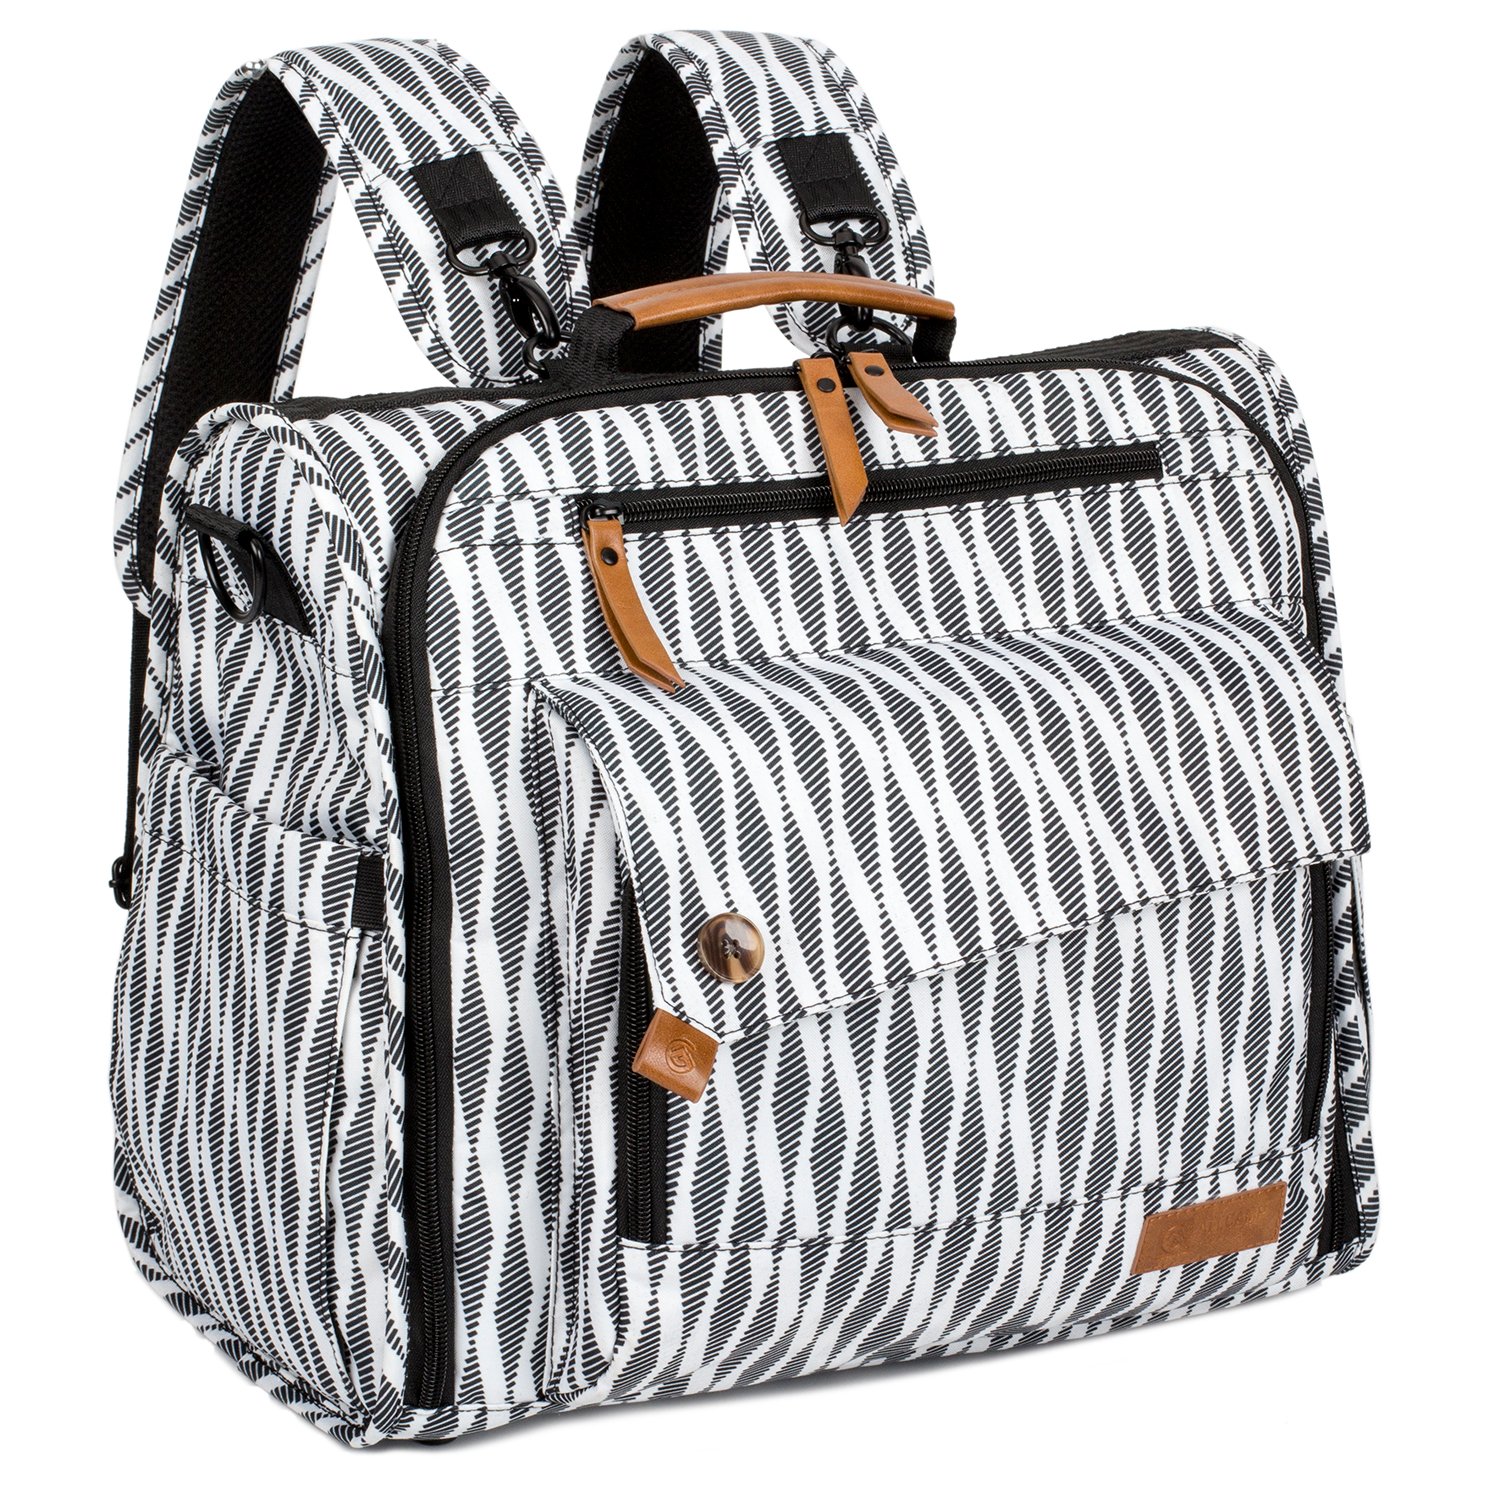 The Best Diaper Bags That Are Actually Stylish